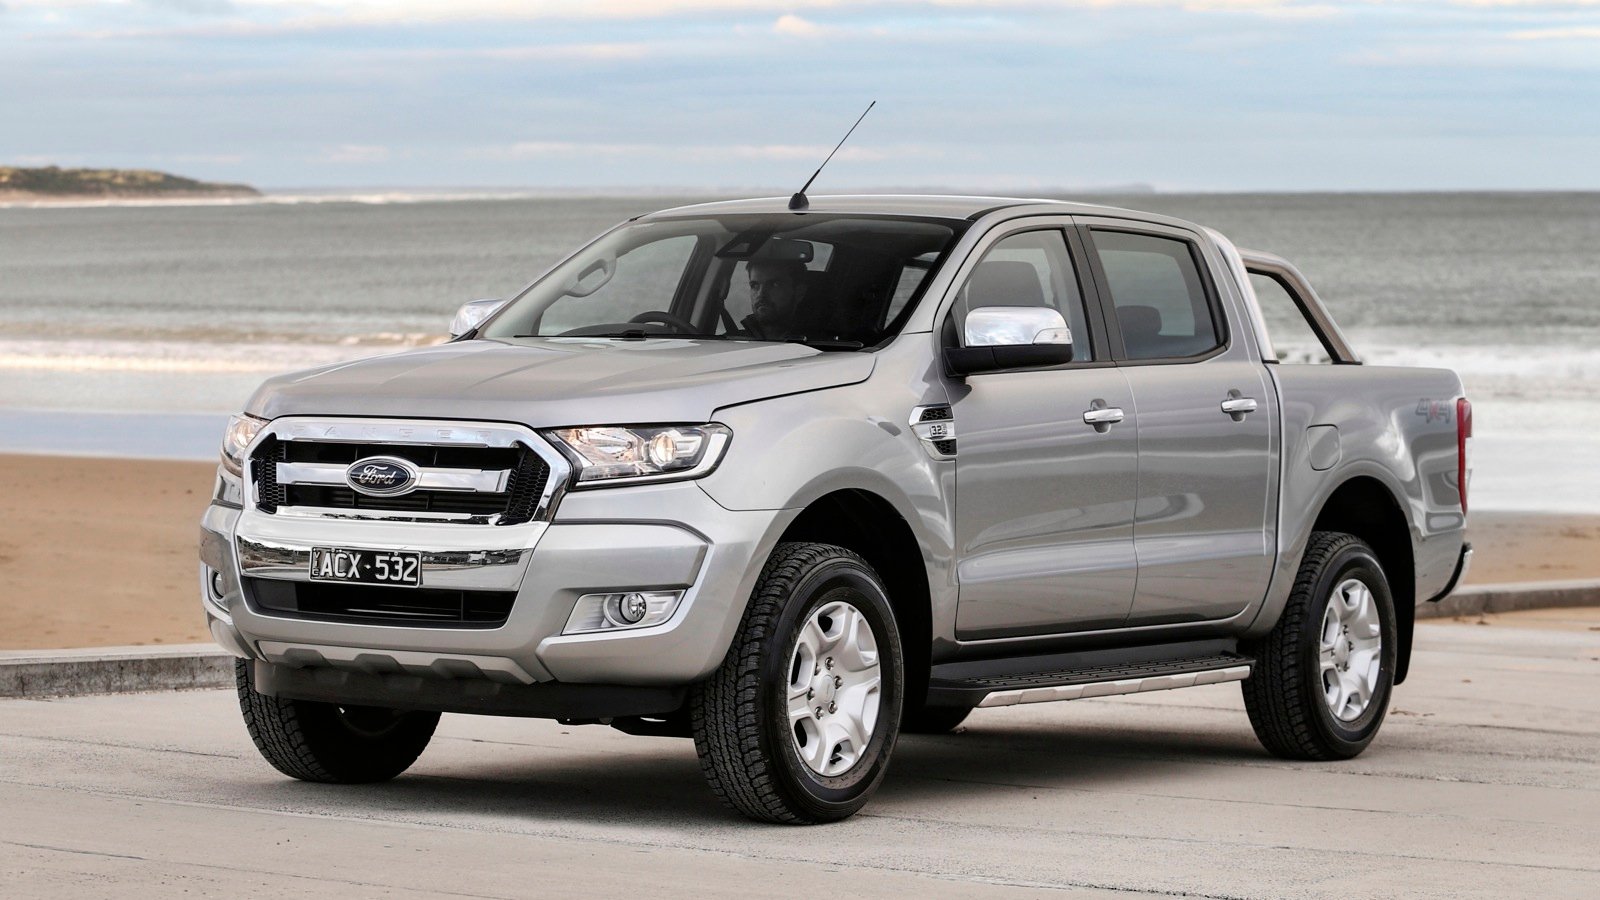 ford ranger review photos caradvice 1024 x 768 jpeg 119kb 2014 ford